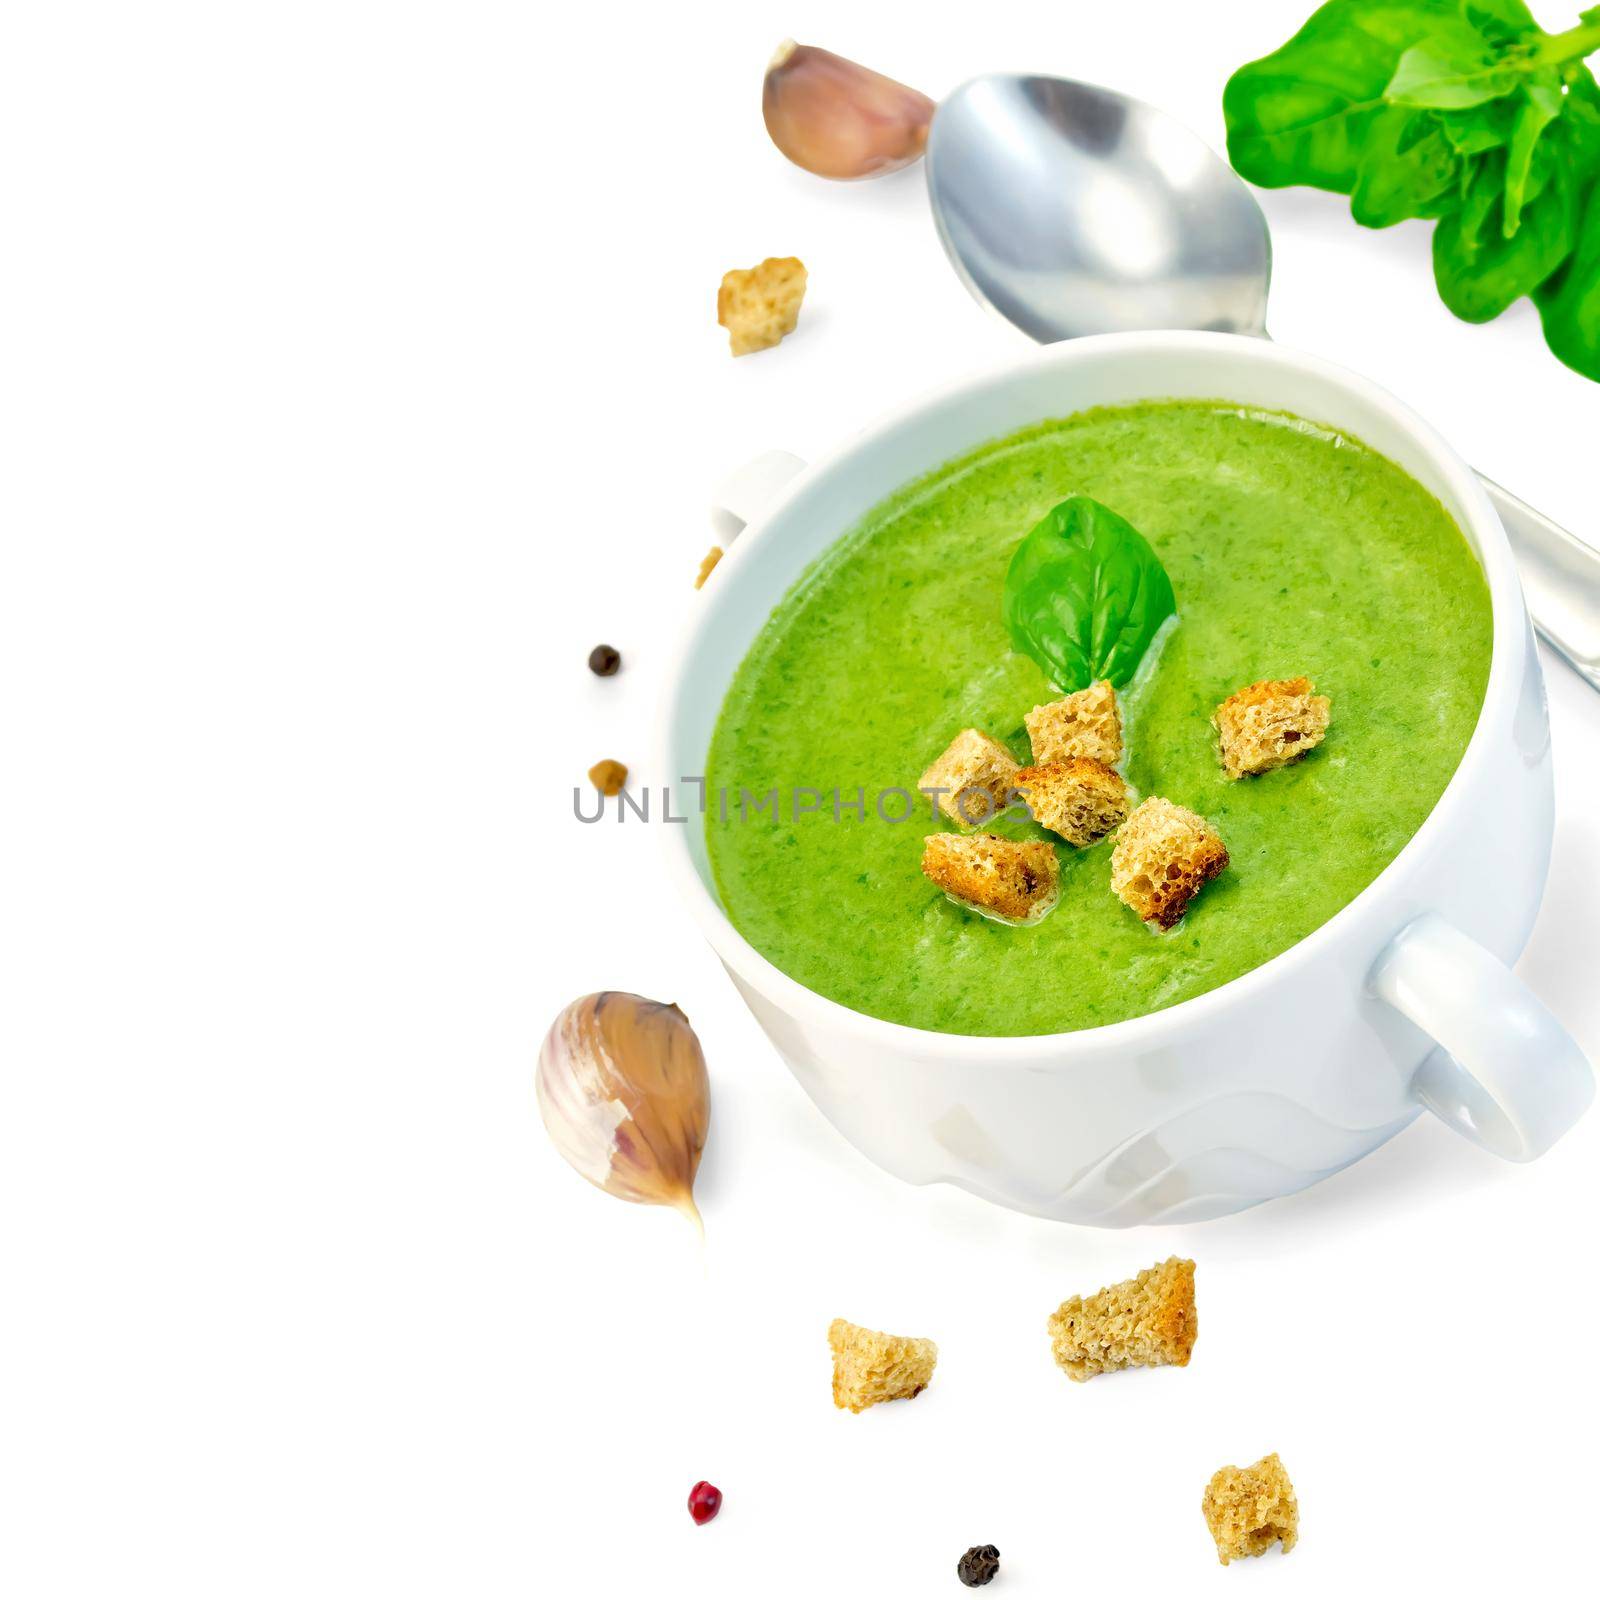 Green soup puree in a white bowl with crackers, spinach, spoon, garlic, pepper isolated on white background